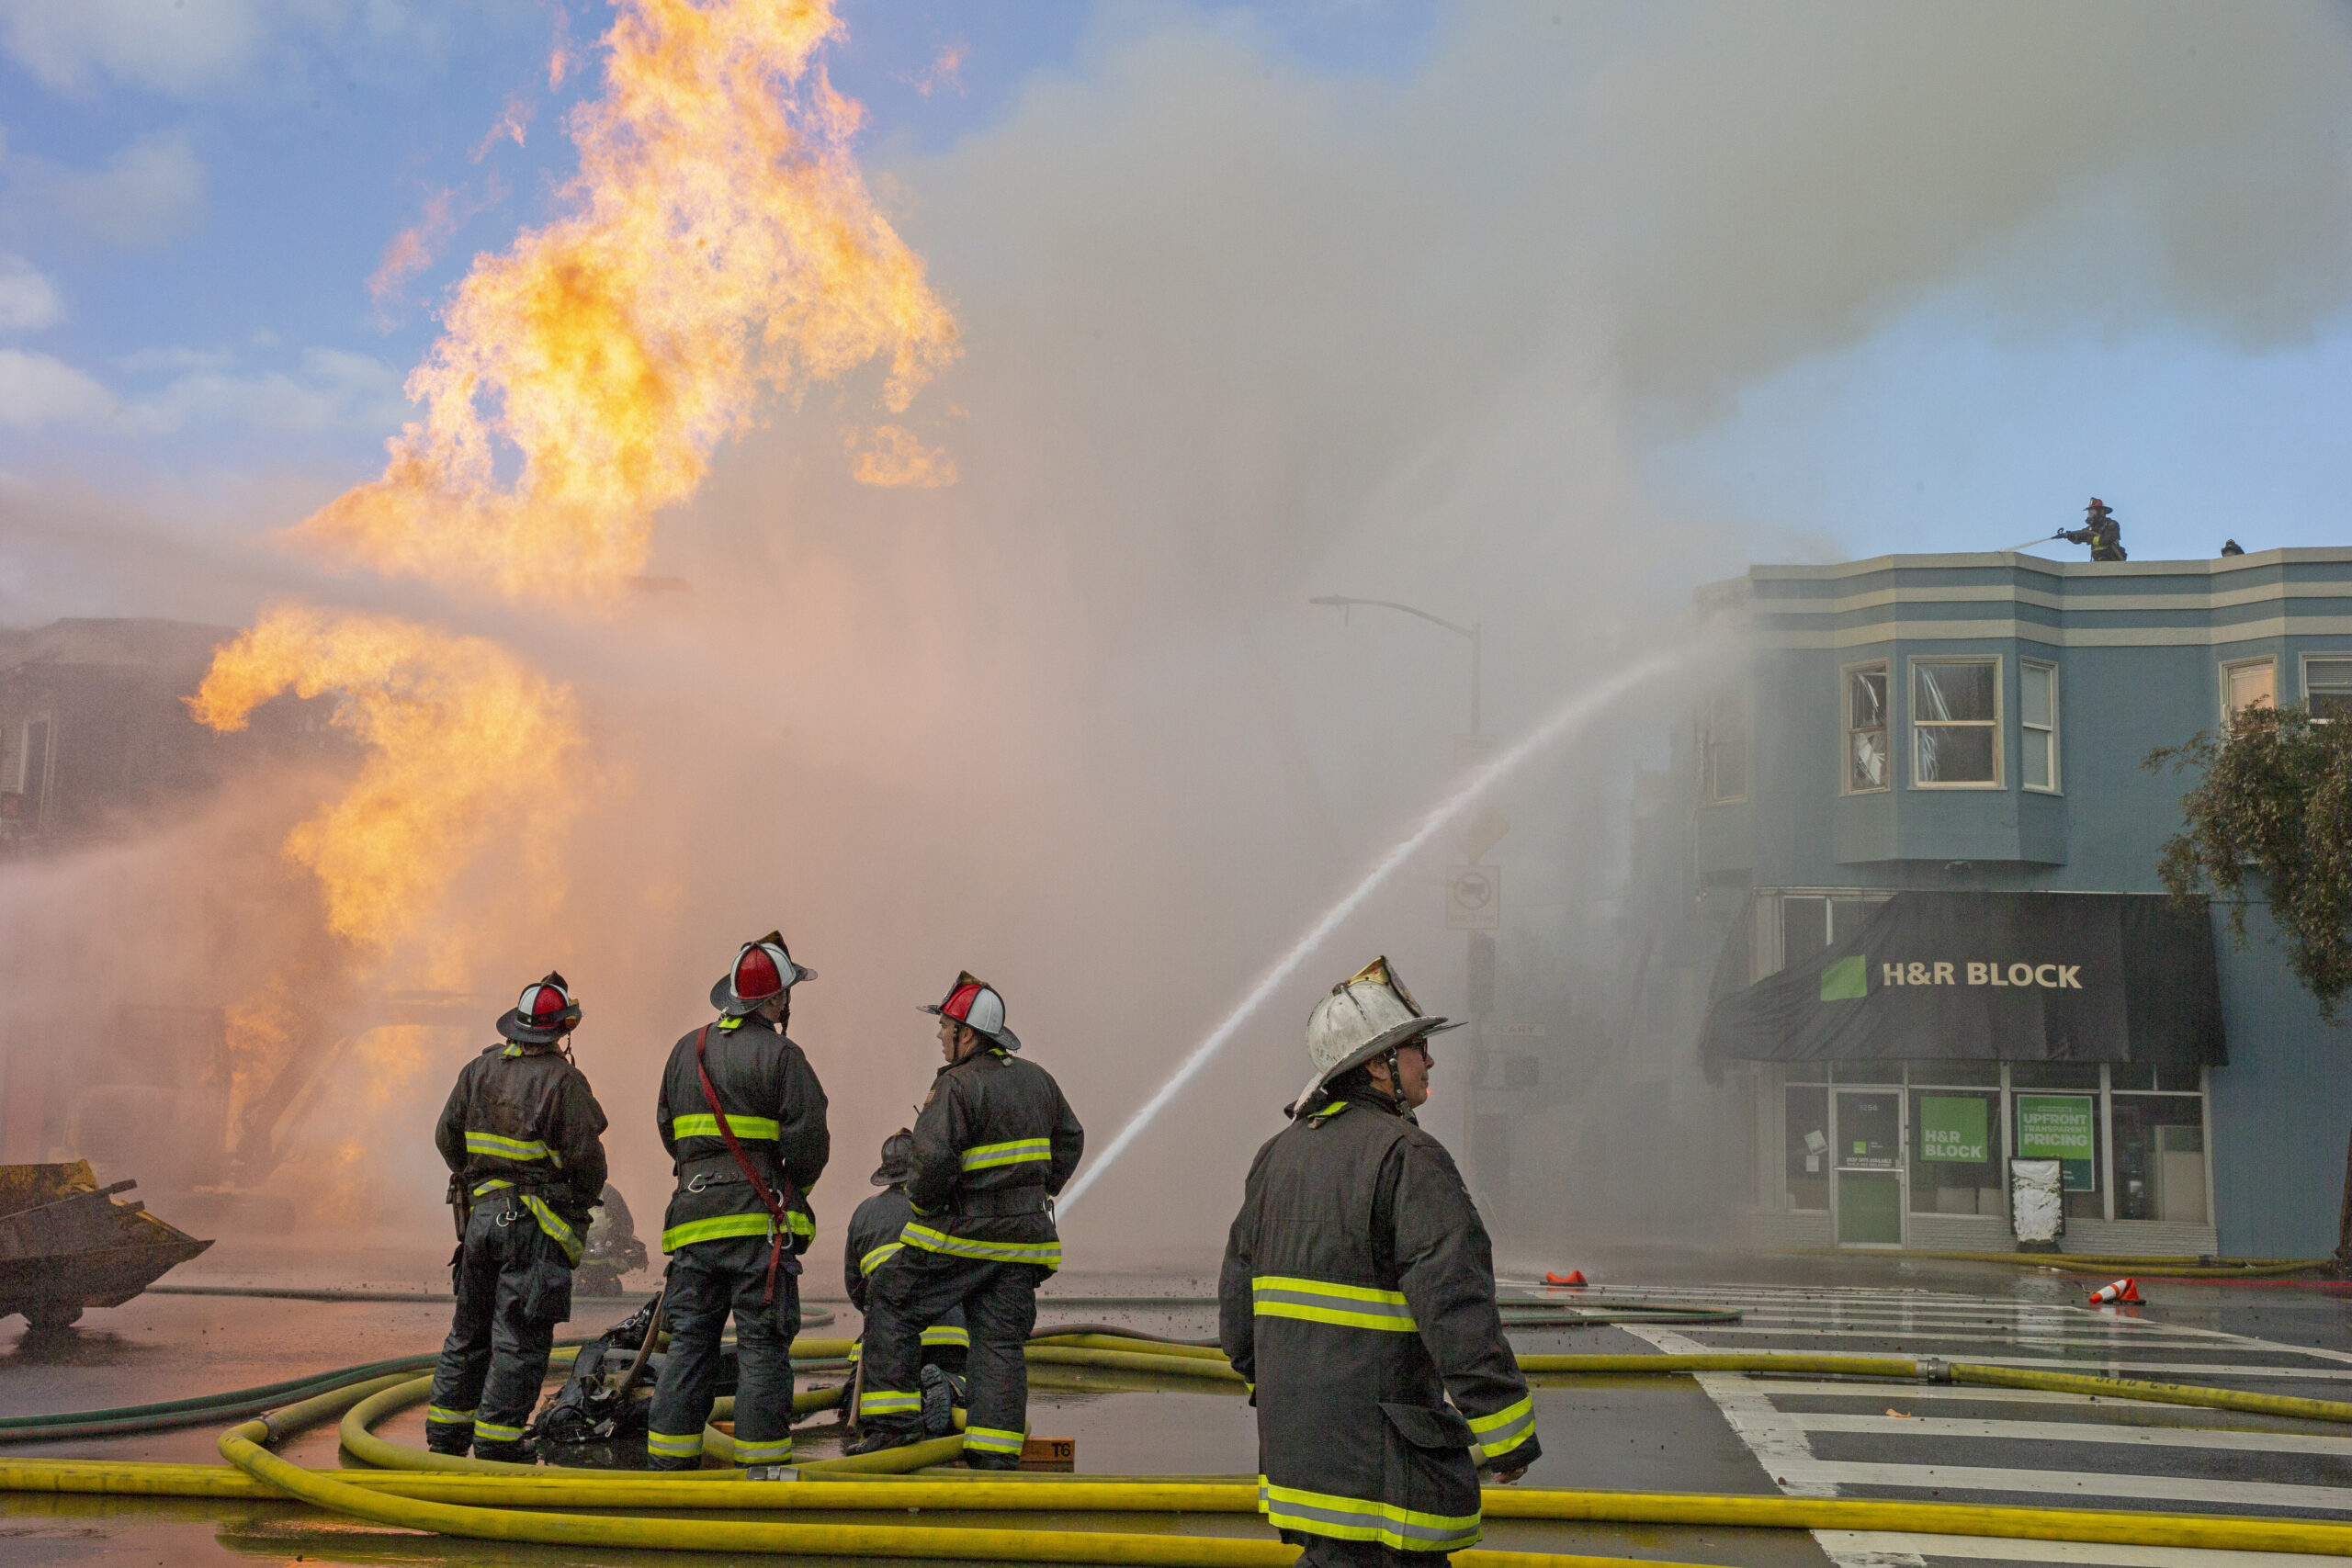 Firefighters with the San Francisco Fire Department battle a blaze following an explosion of a gas line in February 2019. | Santiago Mejia/Pool/Getty Images